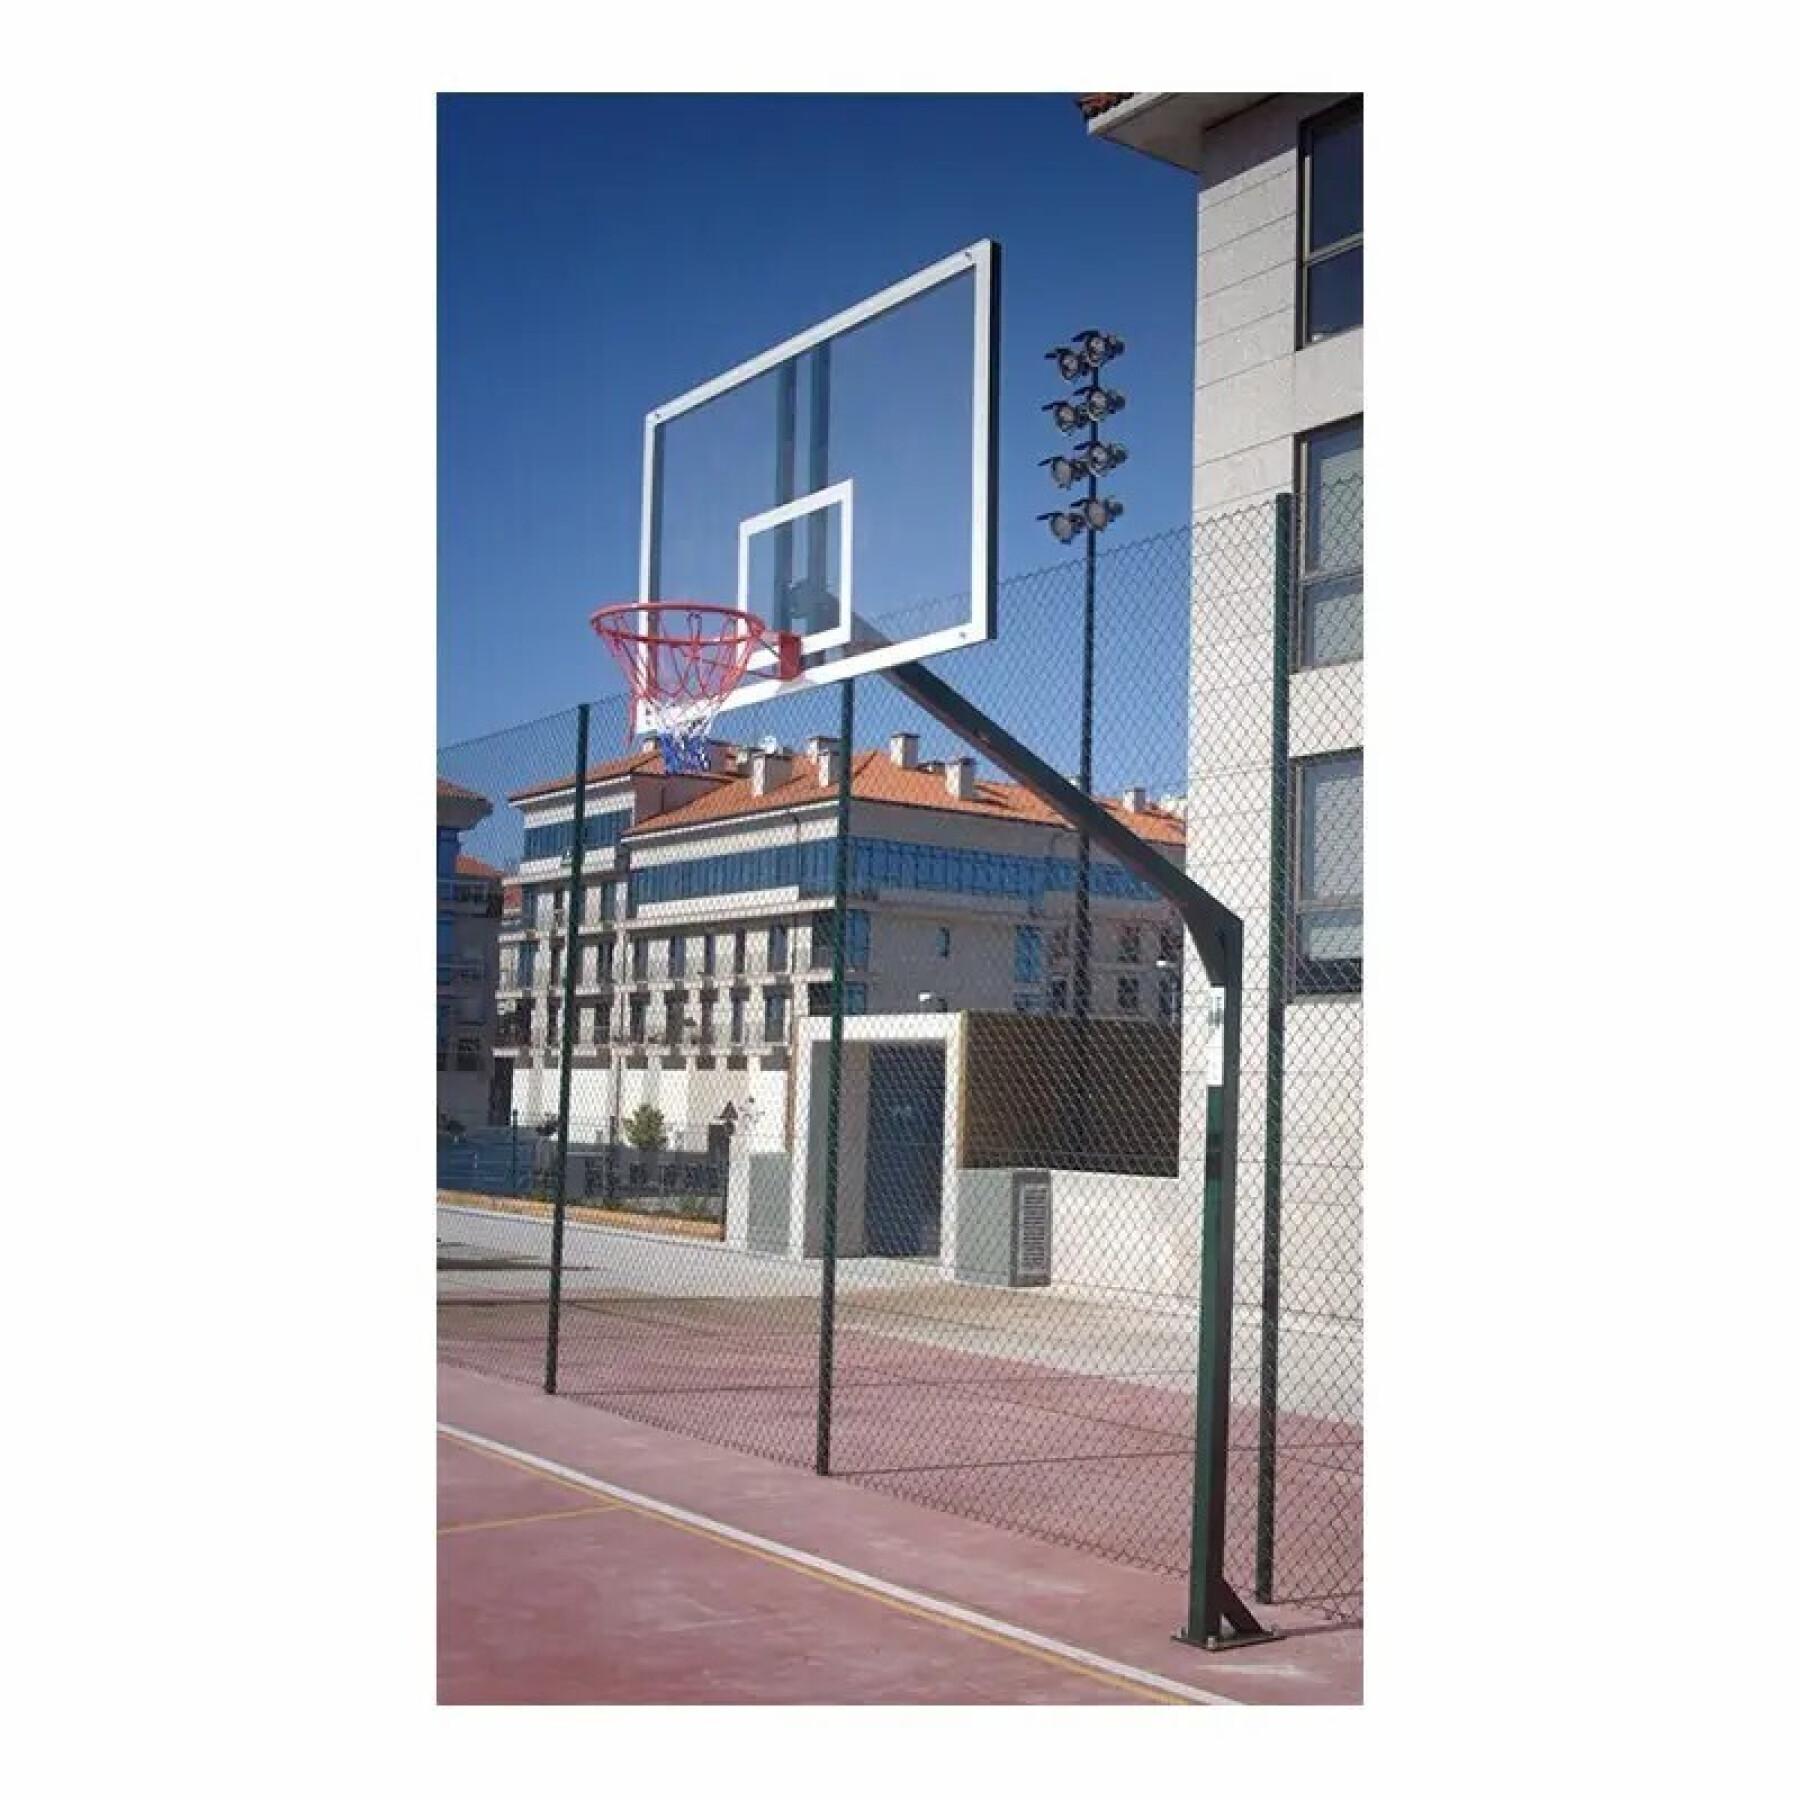 Set of 2 fixed basketball baskets with base for anchoring without boards or hoops Softee Equipment Monotubular